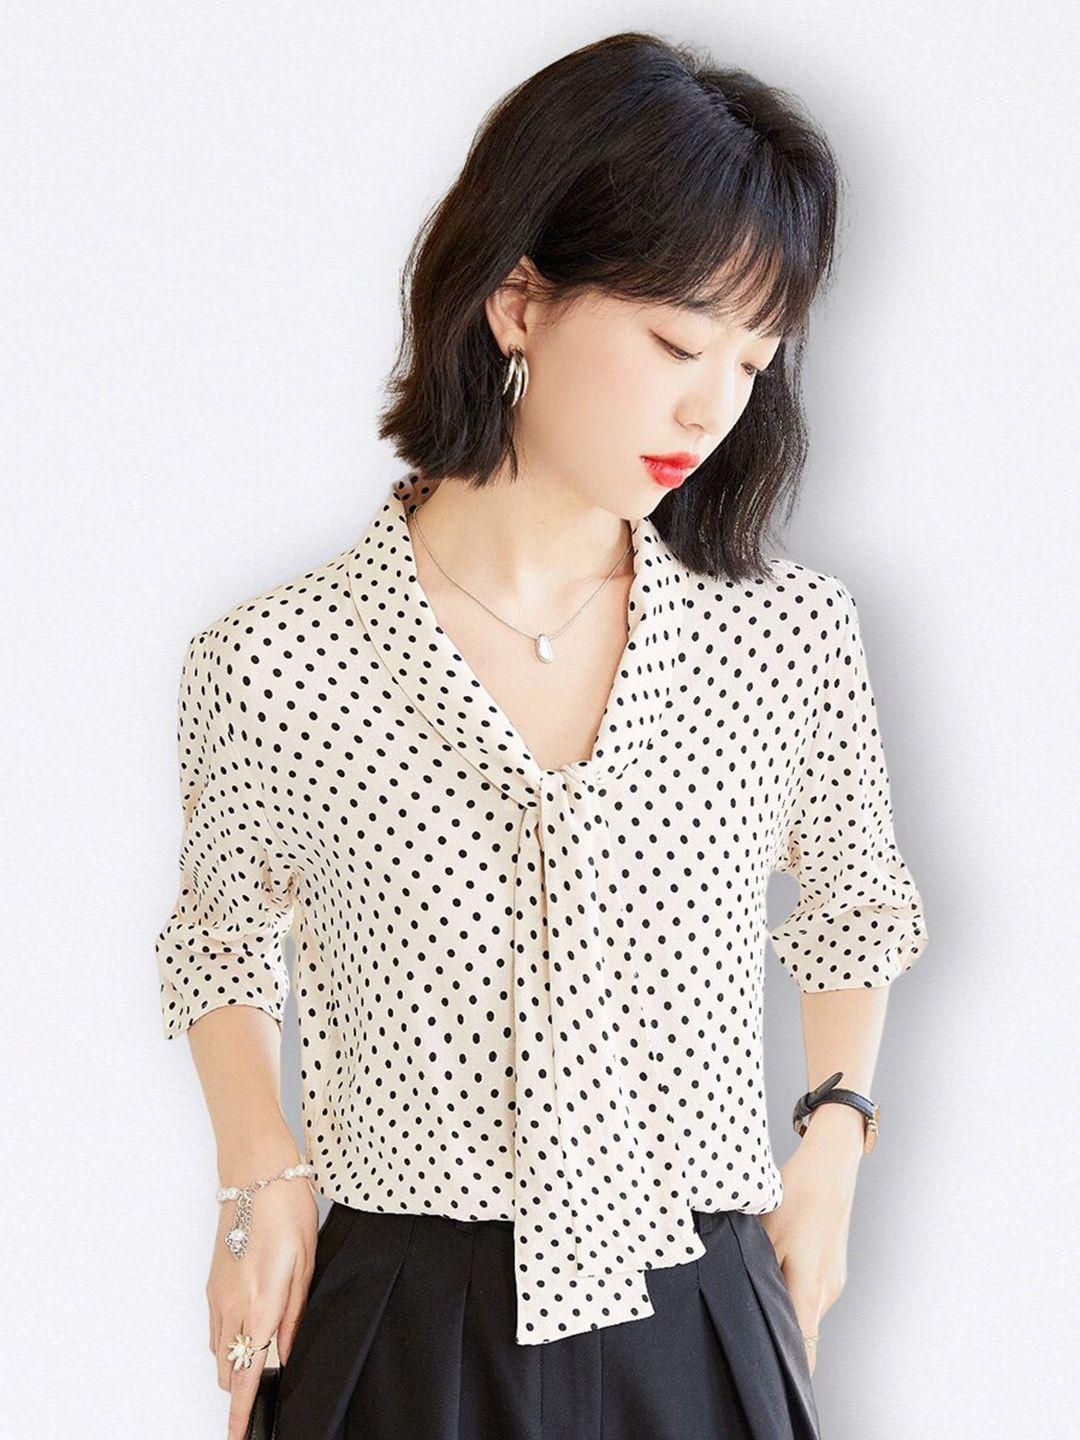 jc collection tie-up neck polka dots printed shirt style top